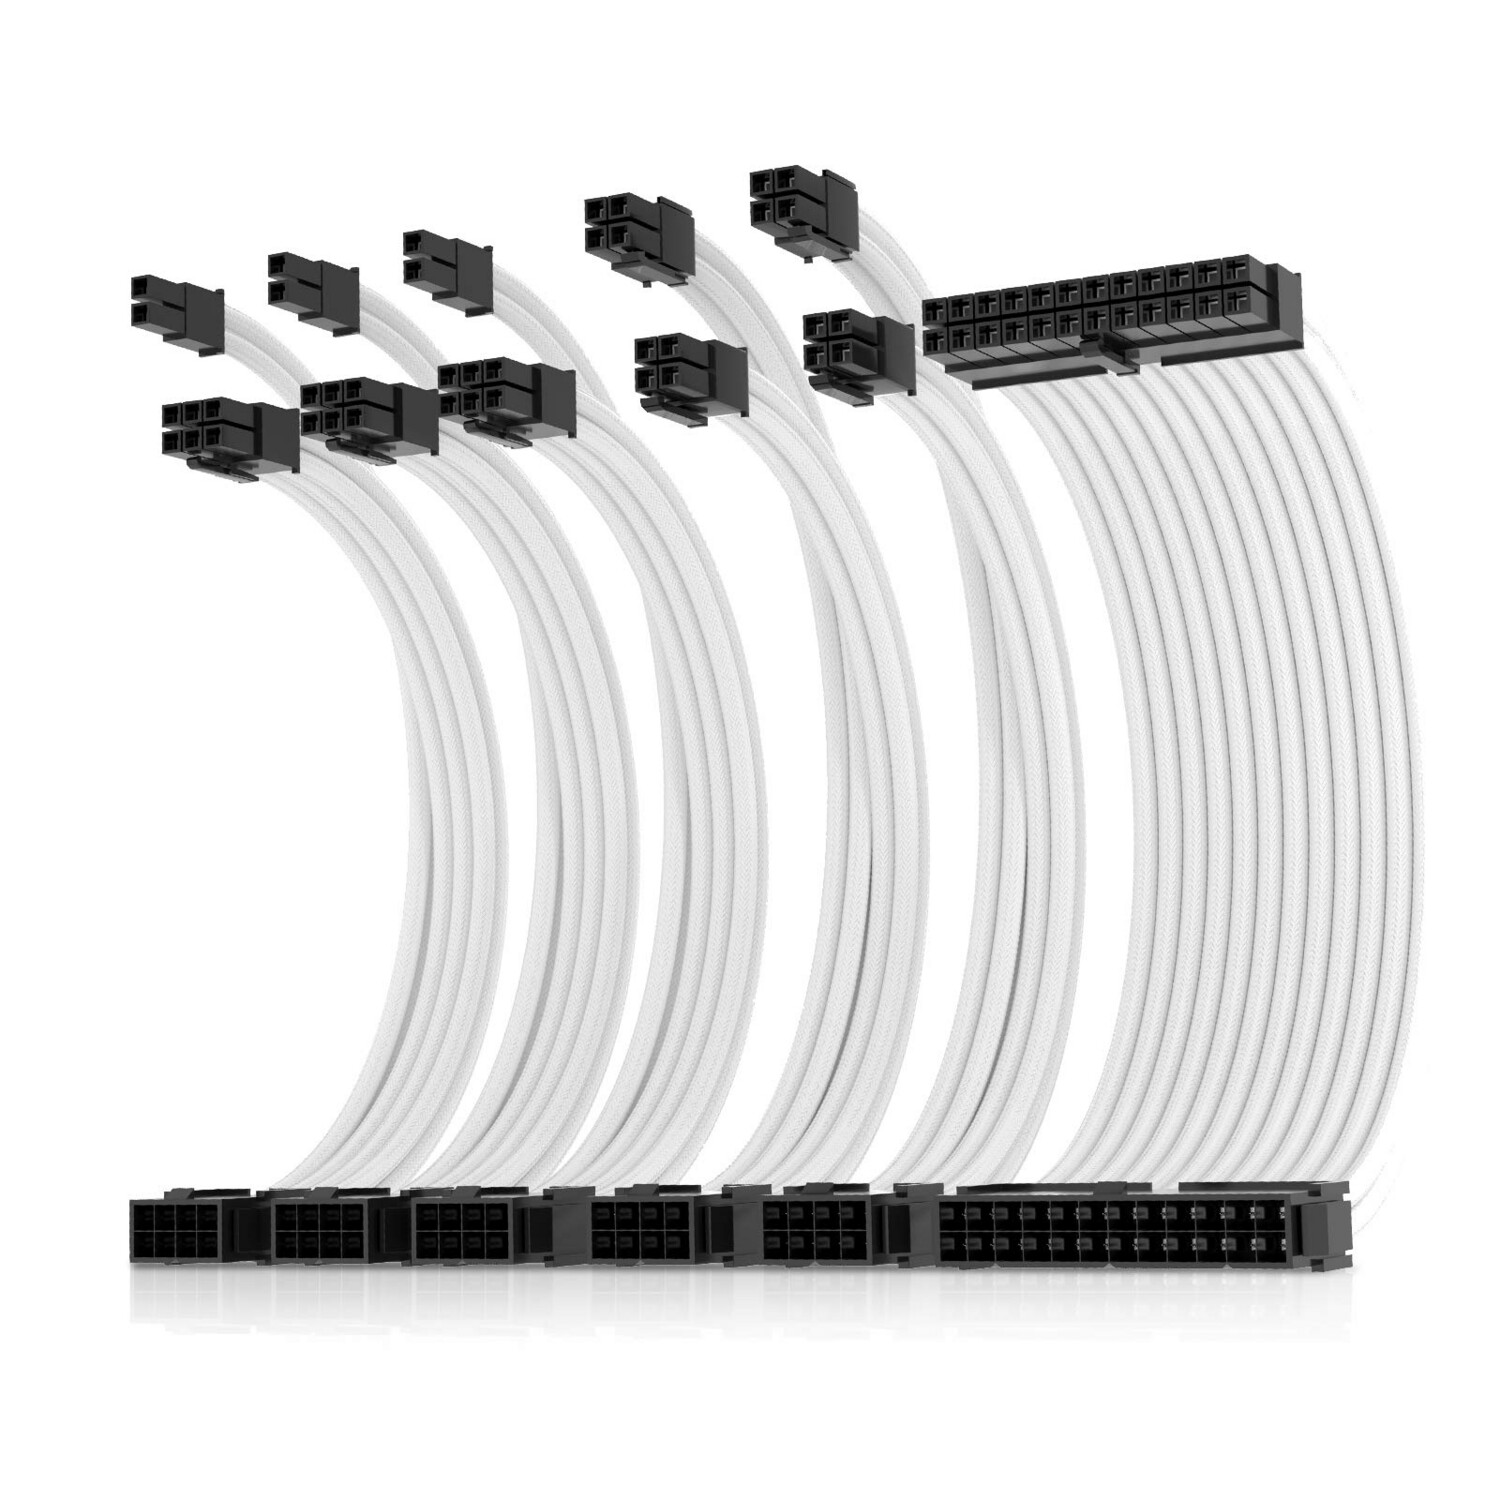 ASIAHORSE Power Supply Cable Extension Kit (White)